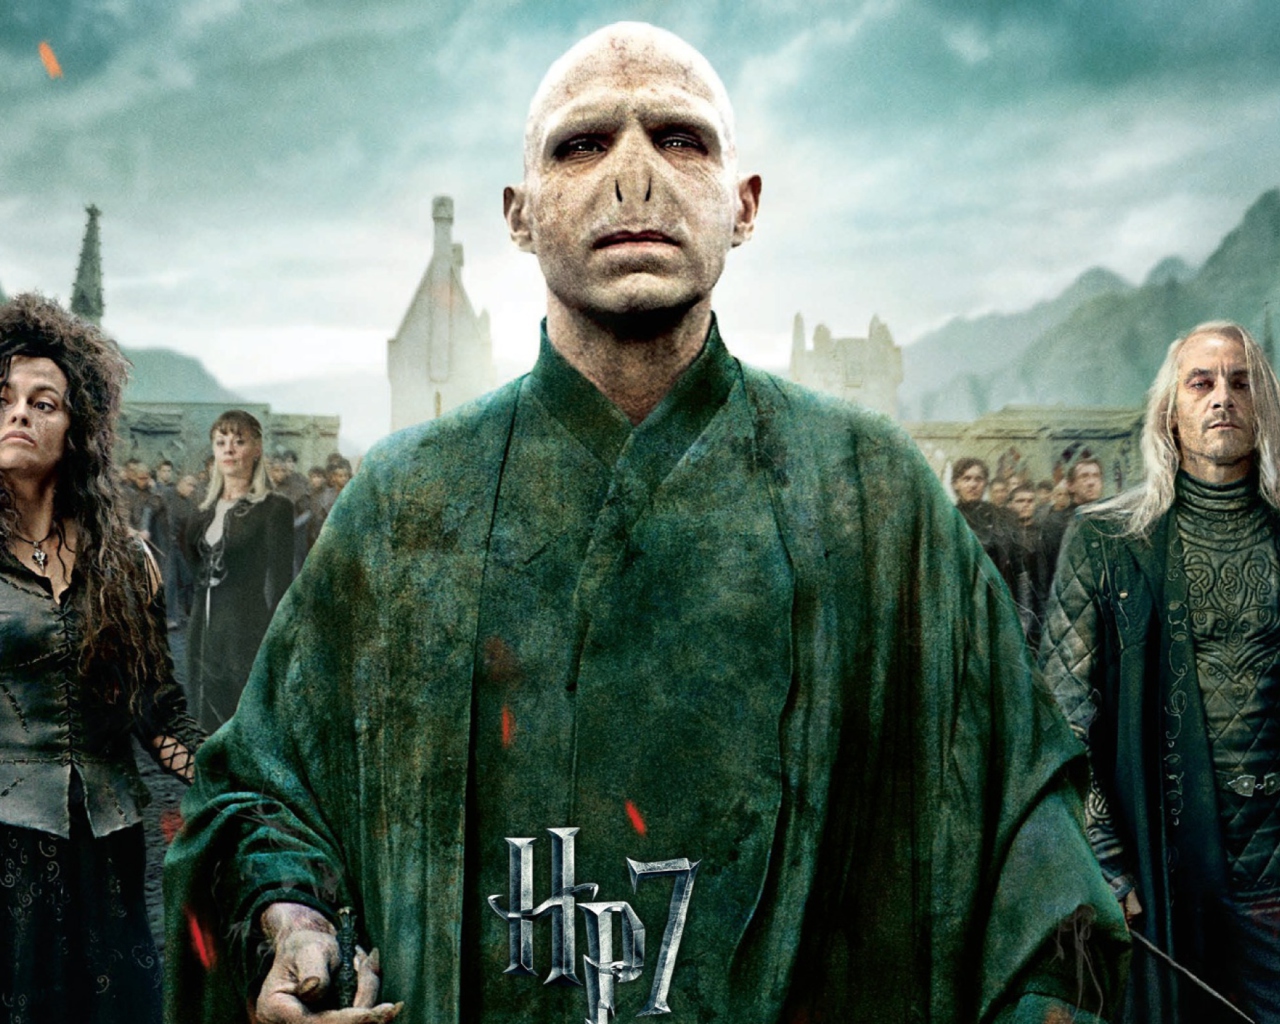 Das Harry Potter And The Deathly Hallows Part 2 Wallpaper 1280x1024